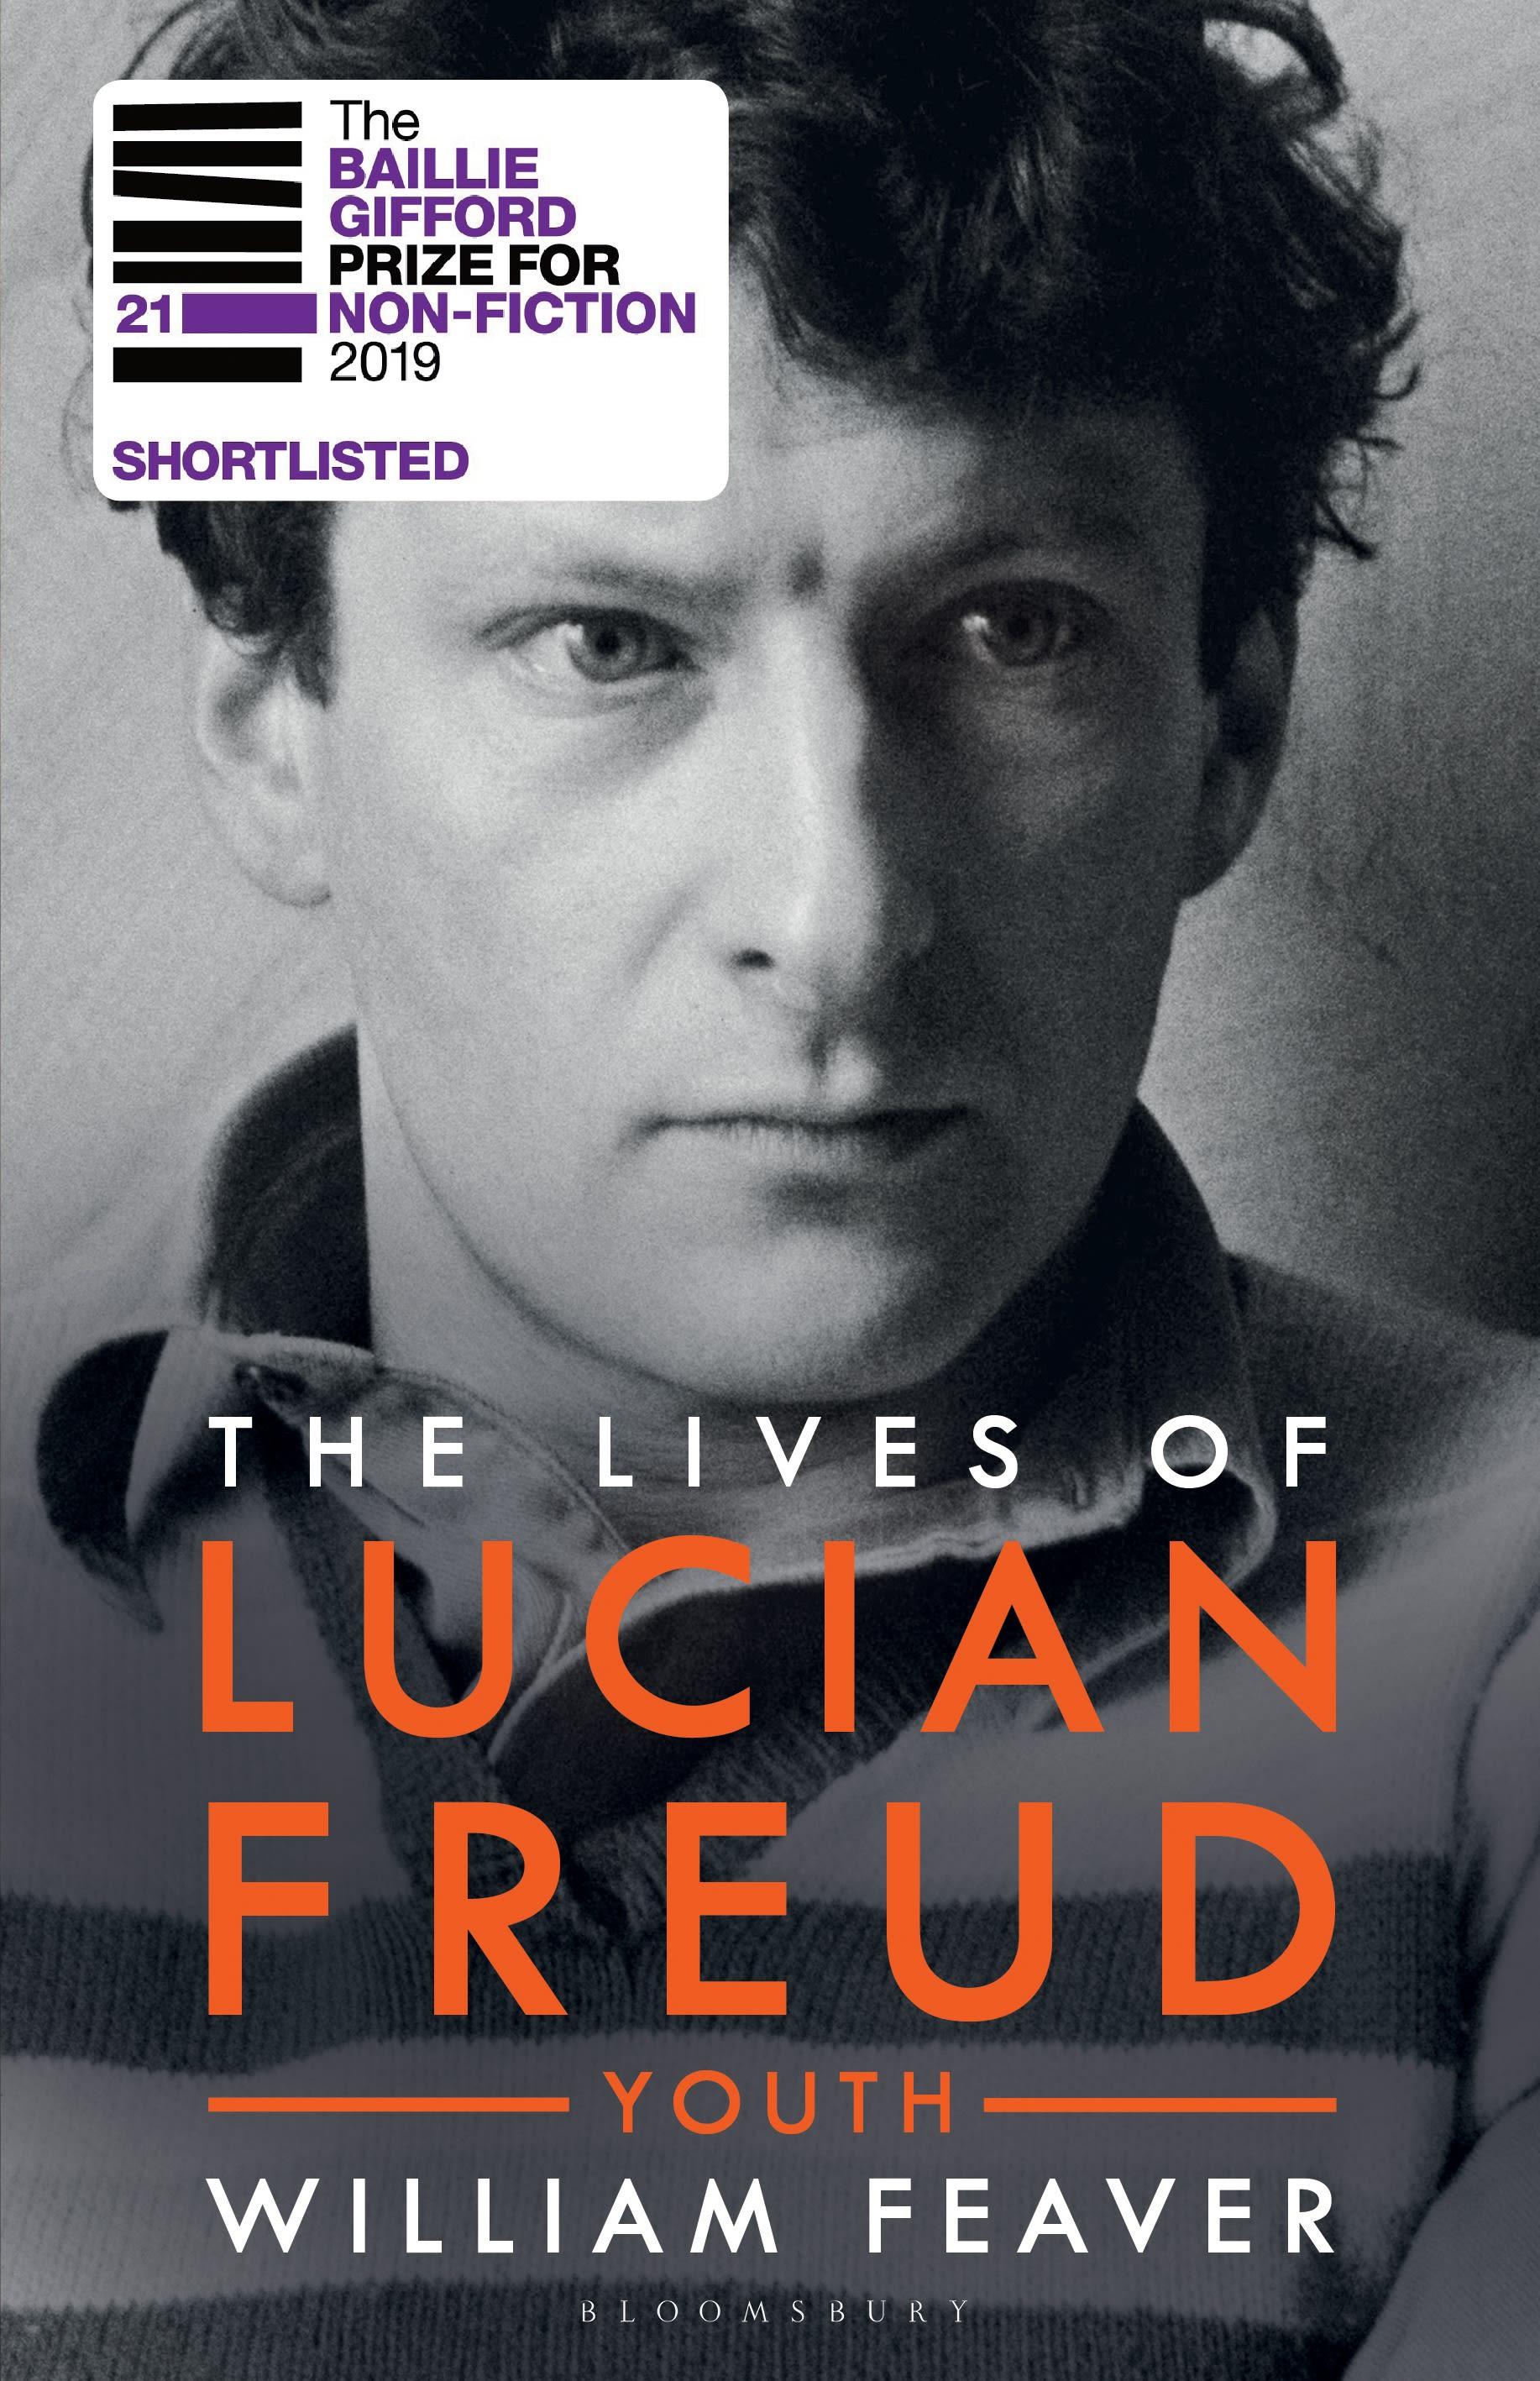 The Lives of Lucian Freud: YOUTH 1922 - 1968 / William Feaver / Buch / 704 S. / Englisch / 2019 / Bloomsbury Publishing PLC / EAN 9781408850930 - Feaver, William